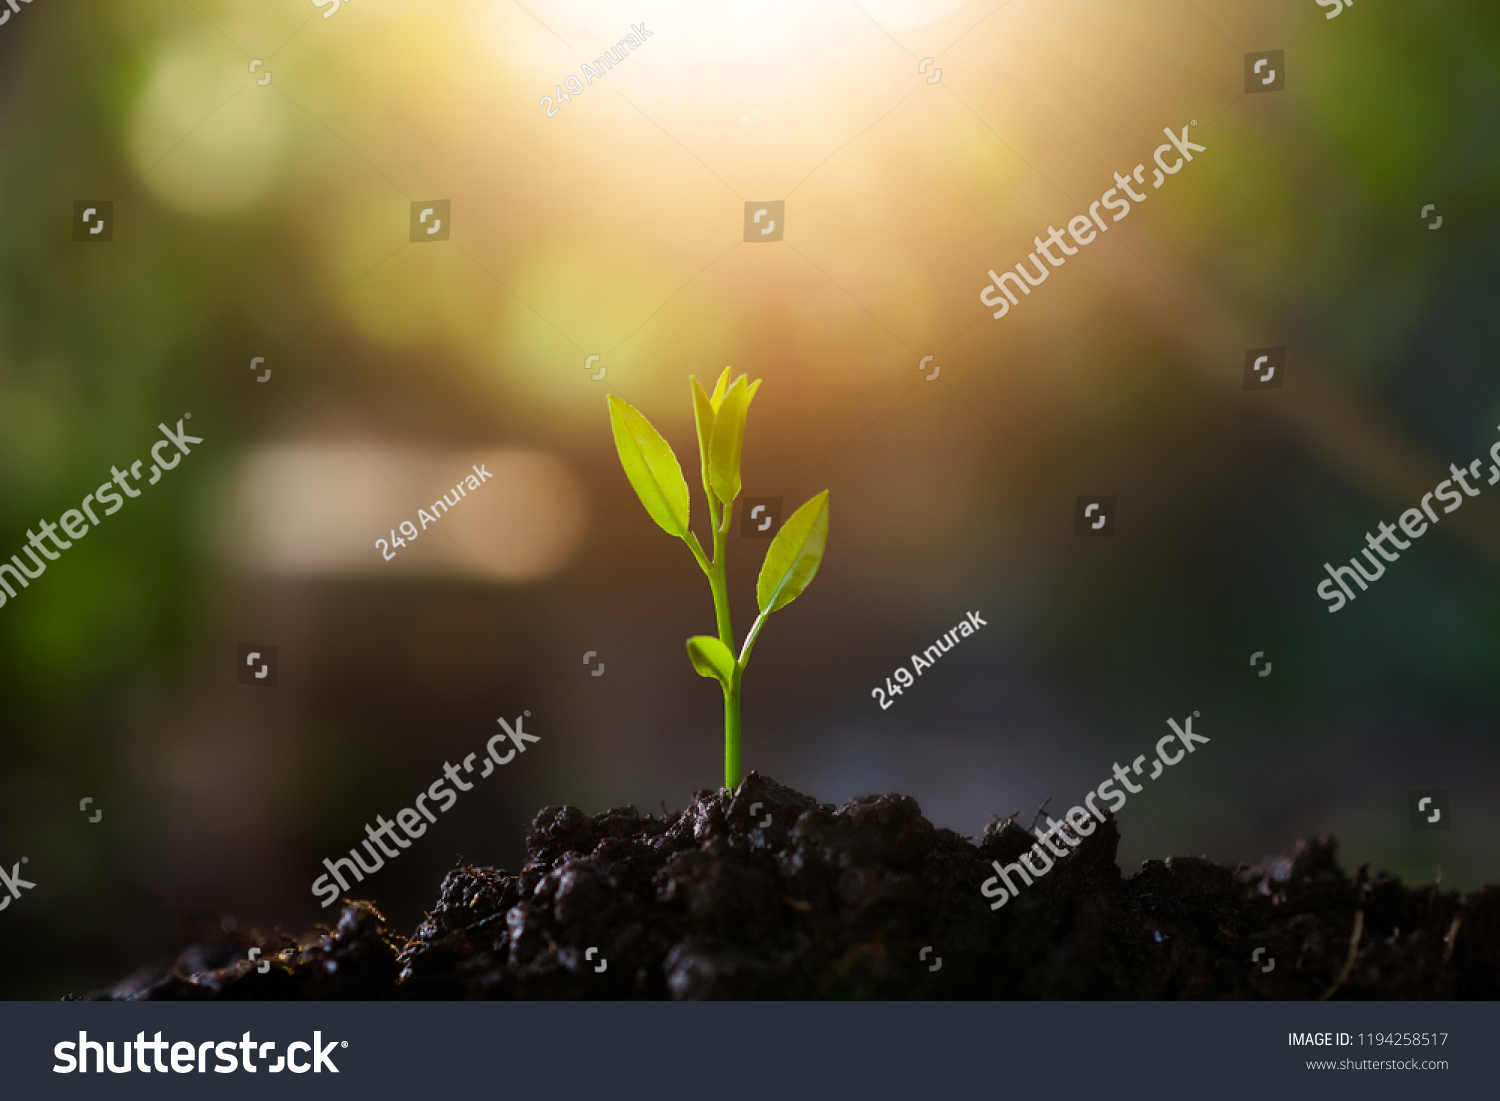 Plant,Seedlings grow in soil with sun light. Planting trees to reduce global warming. #1194258517